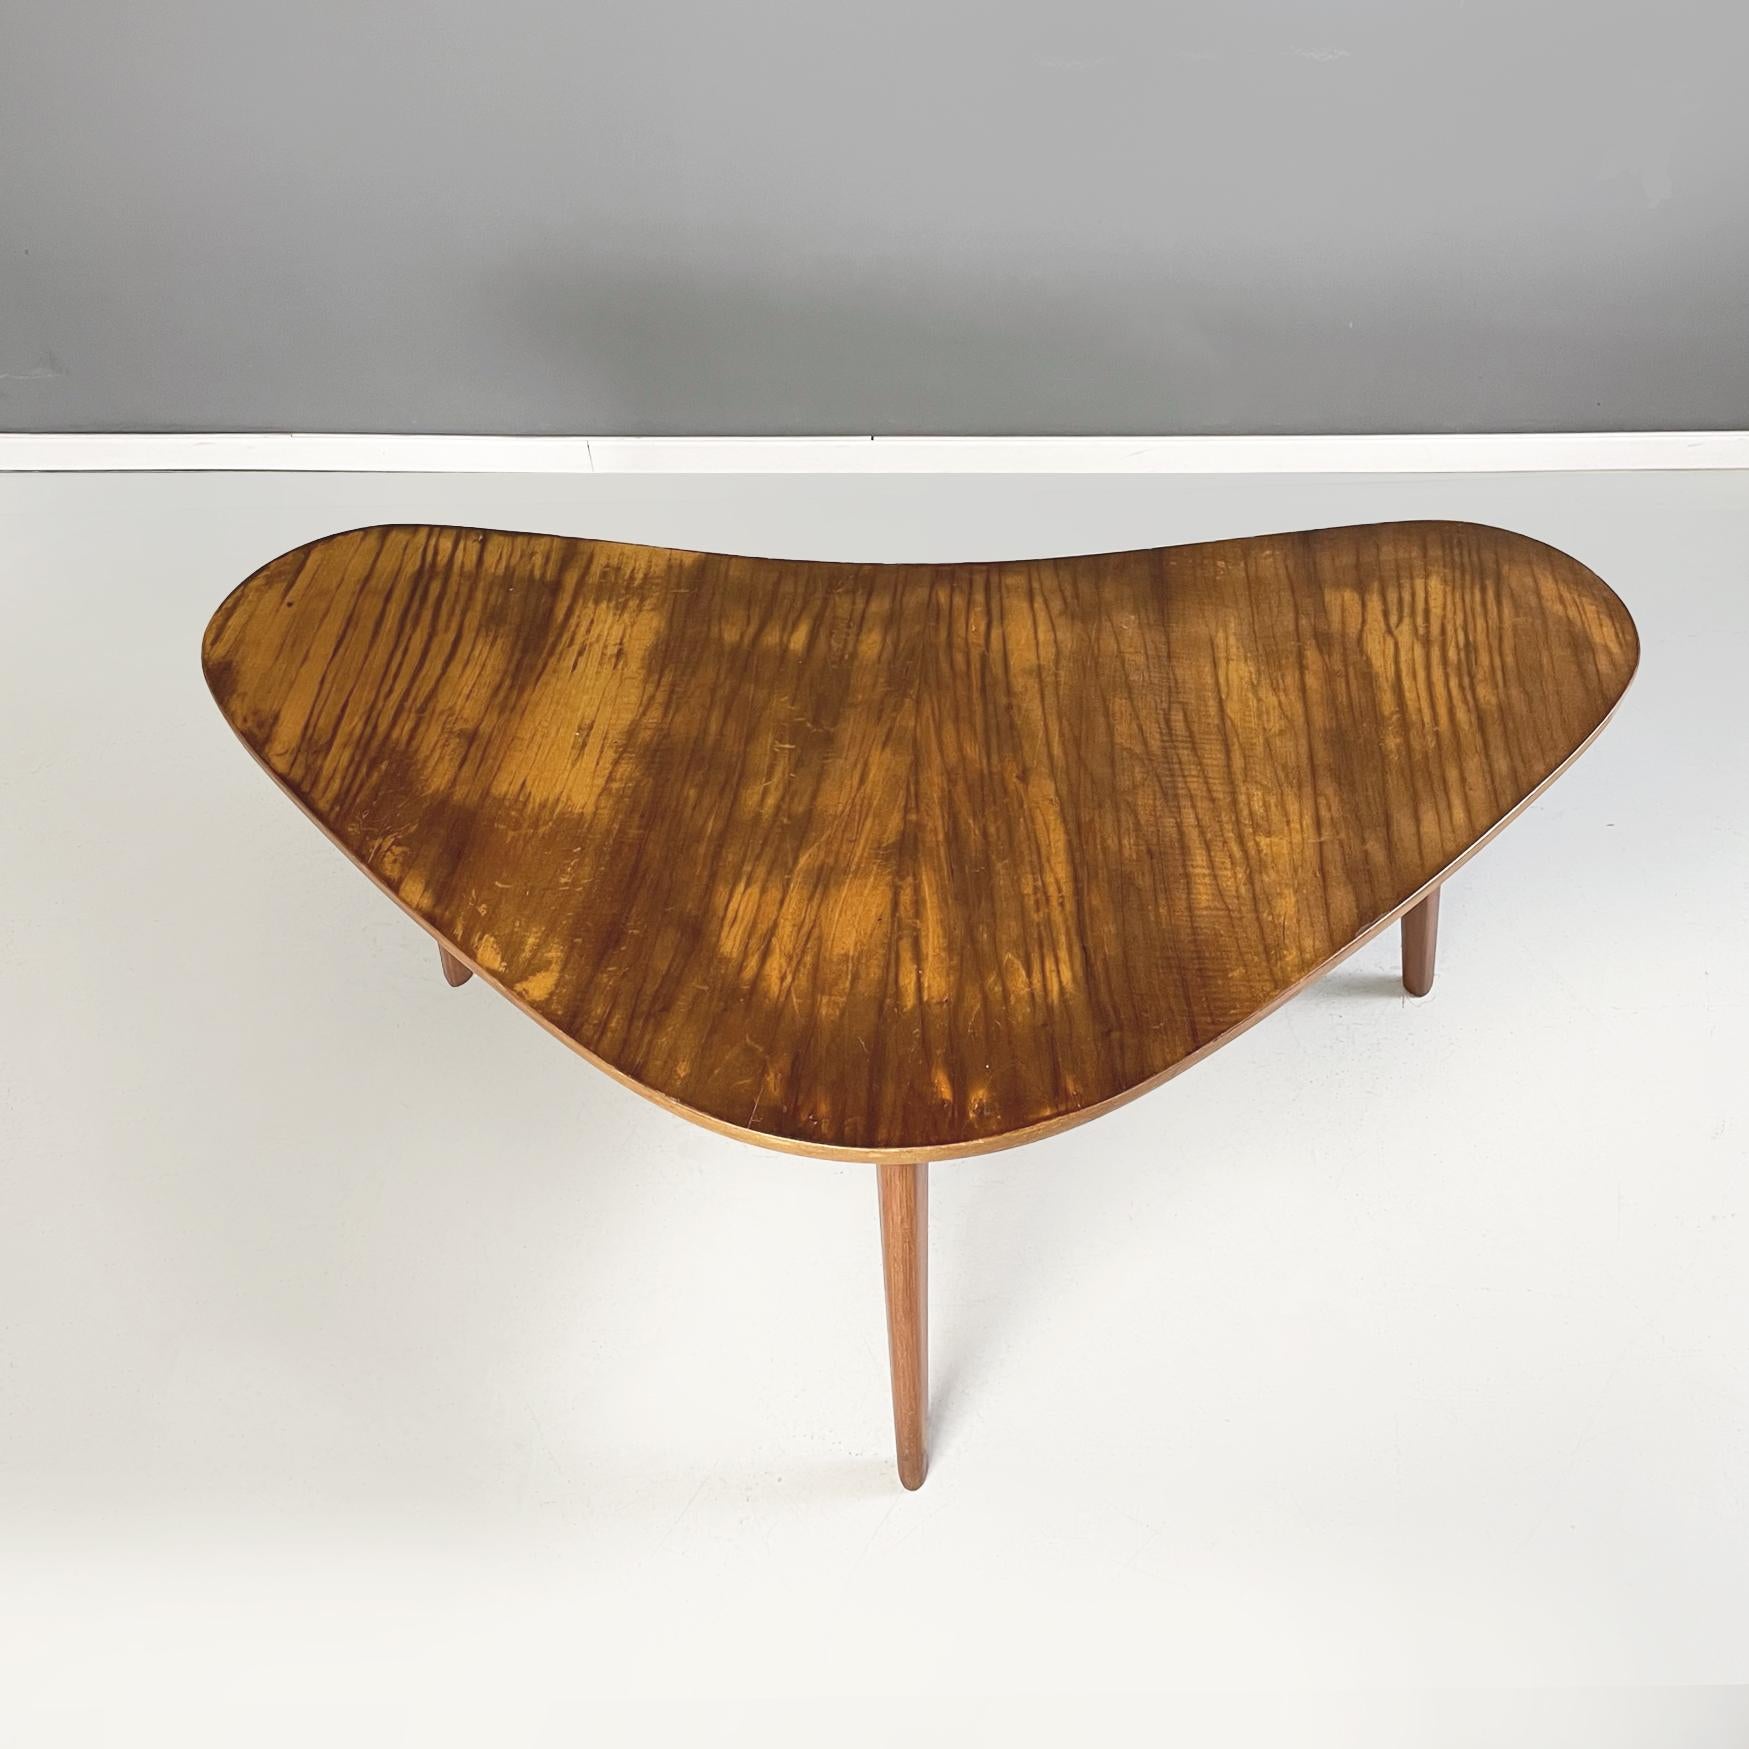 European North Europa Midcentury Triangular Coffe Table with Double Shelves in Wood, 1960 For Sale